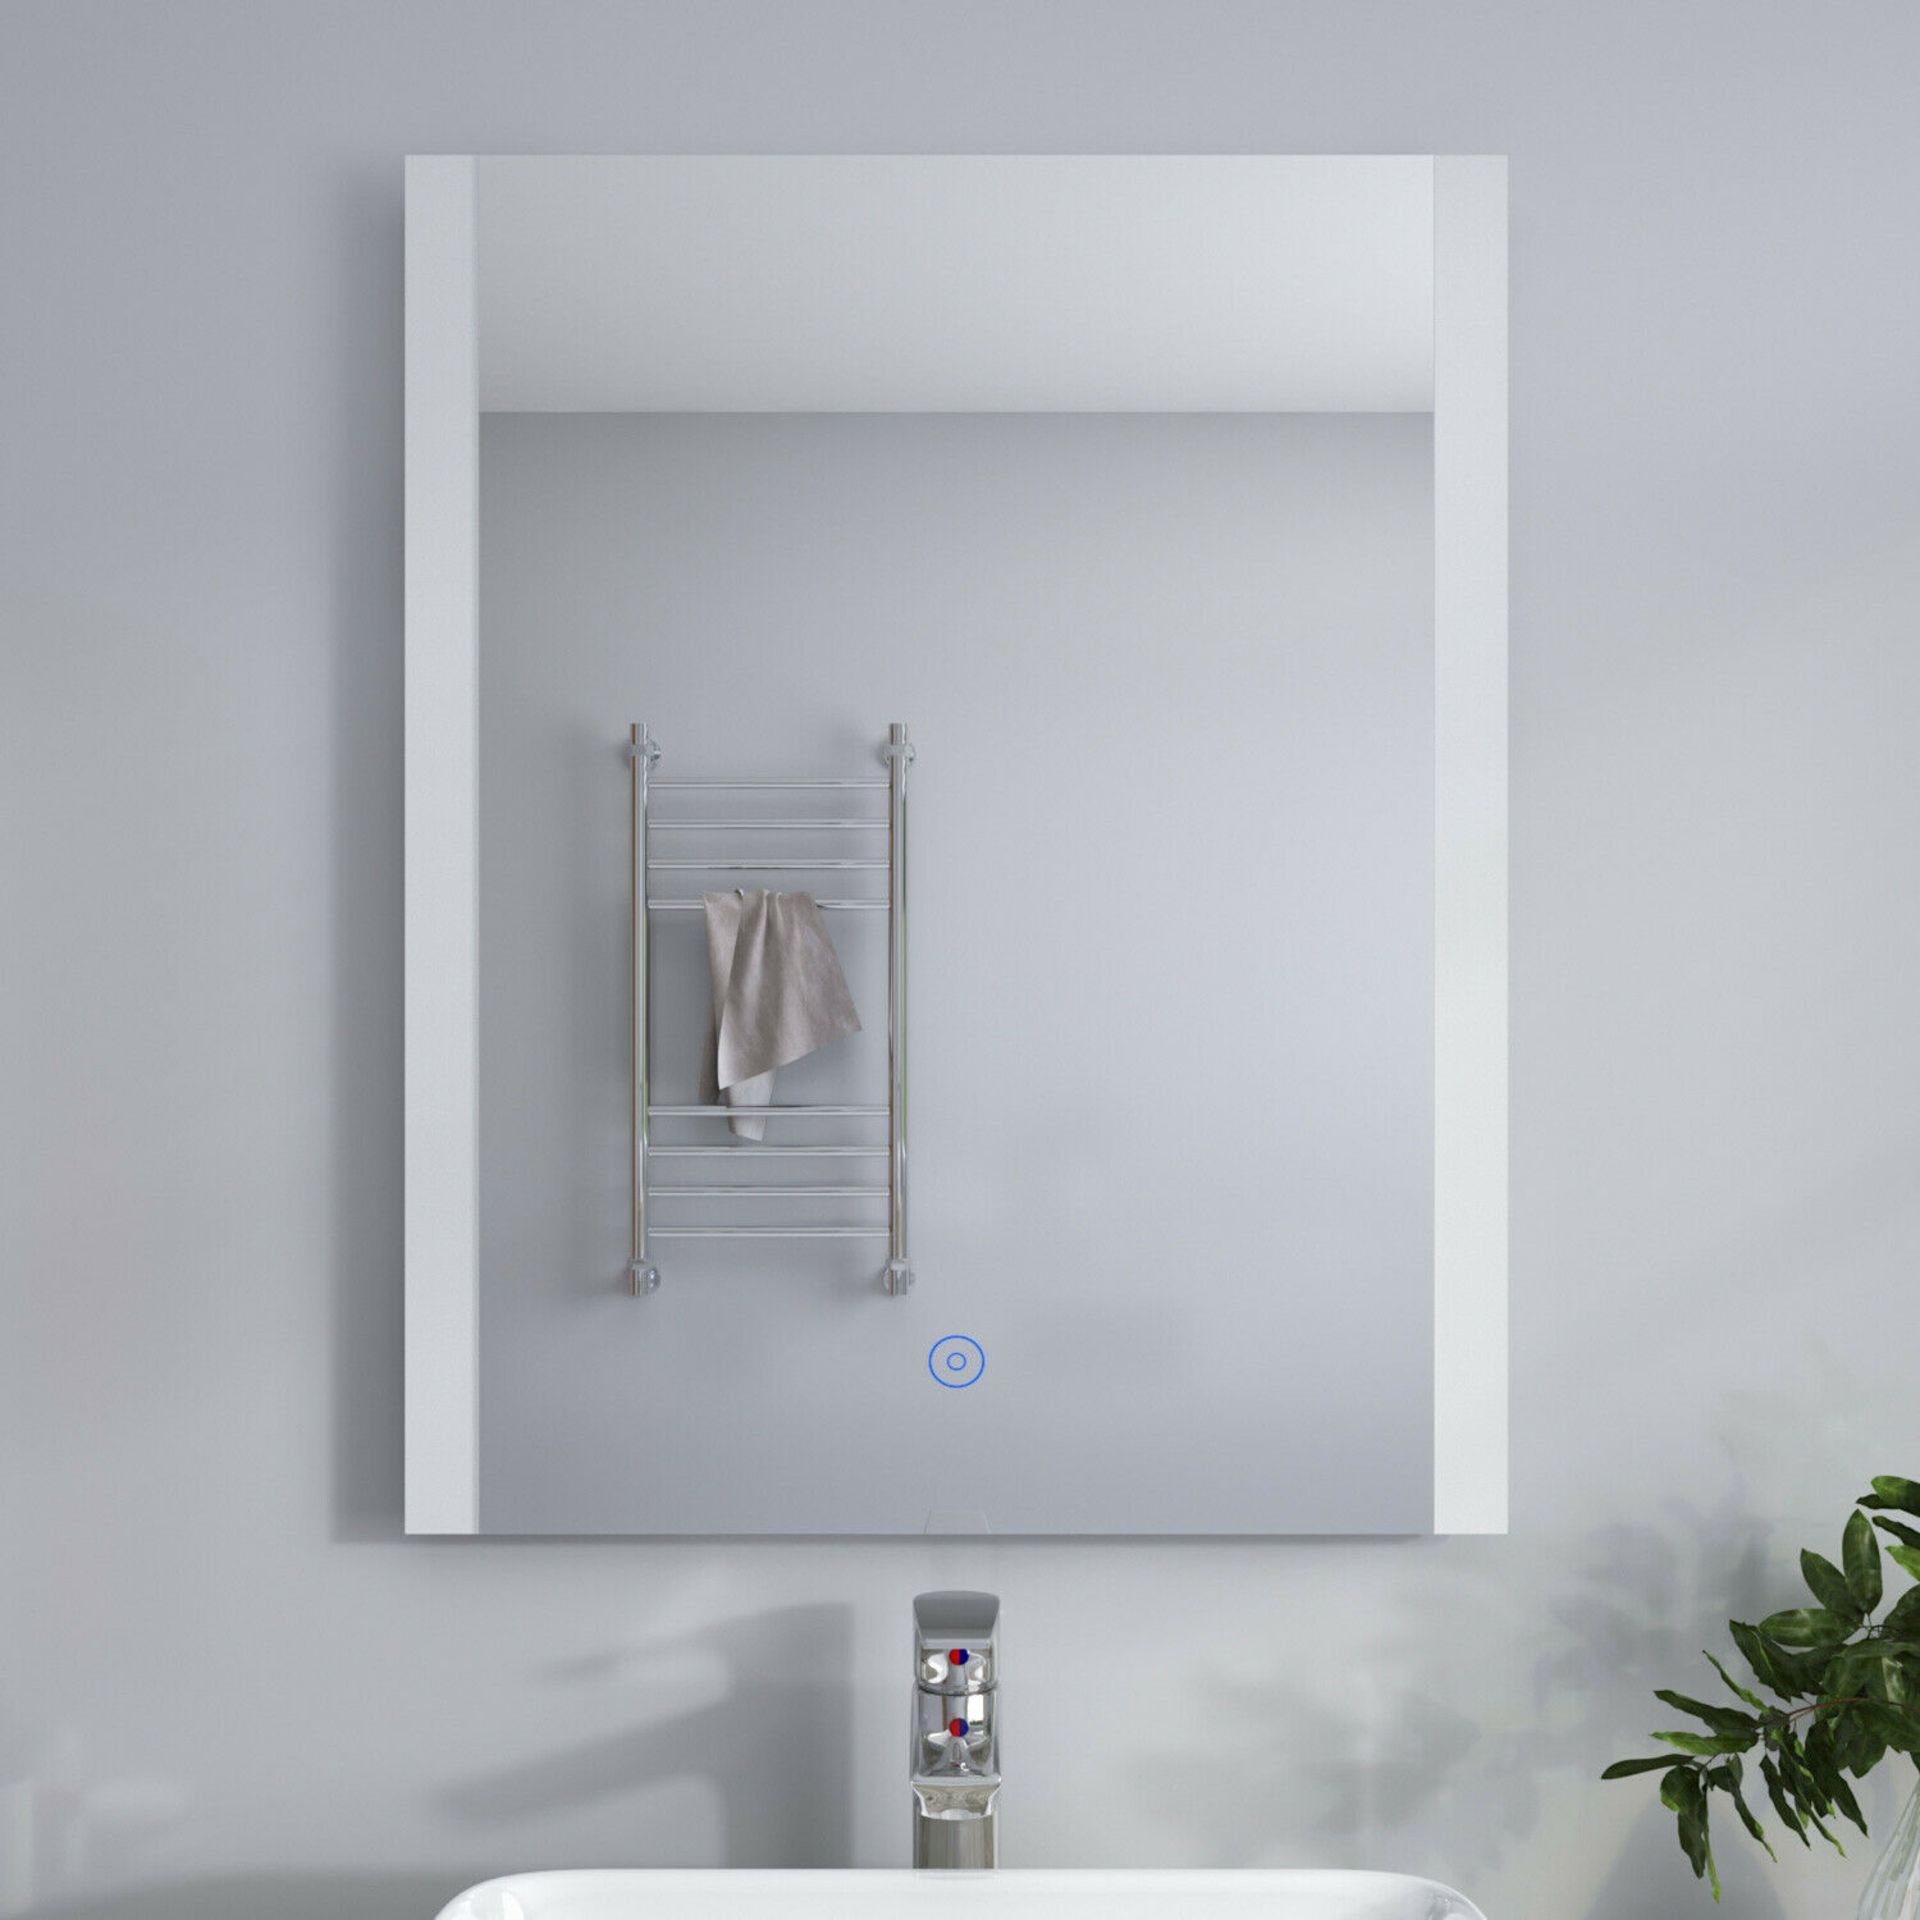 (KN82) 600x800mm Cosmic LED Illuminated Bathroom Mirror. We love this mirror as it provides a w... - Image 3 of 3